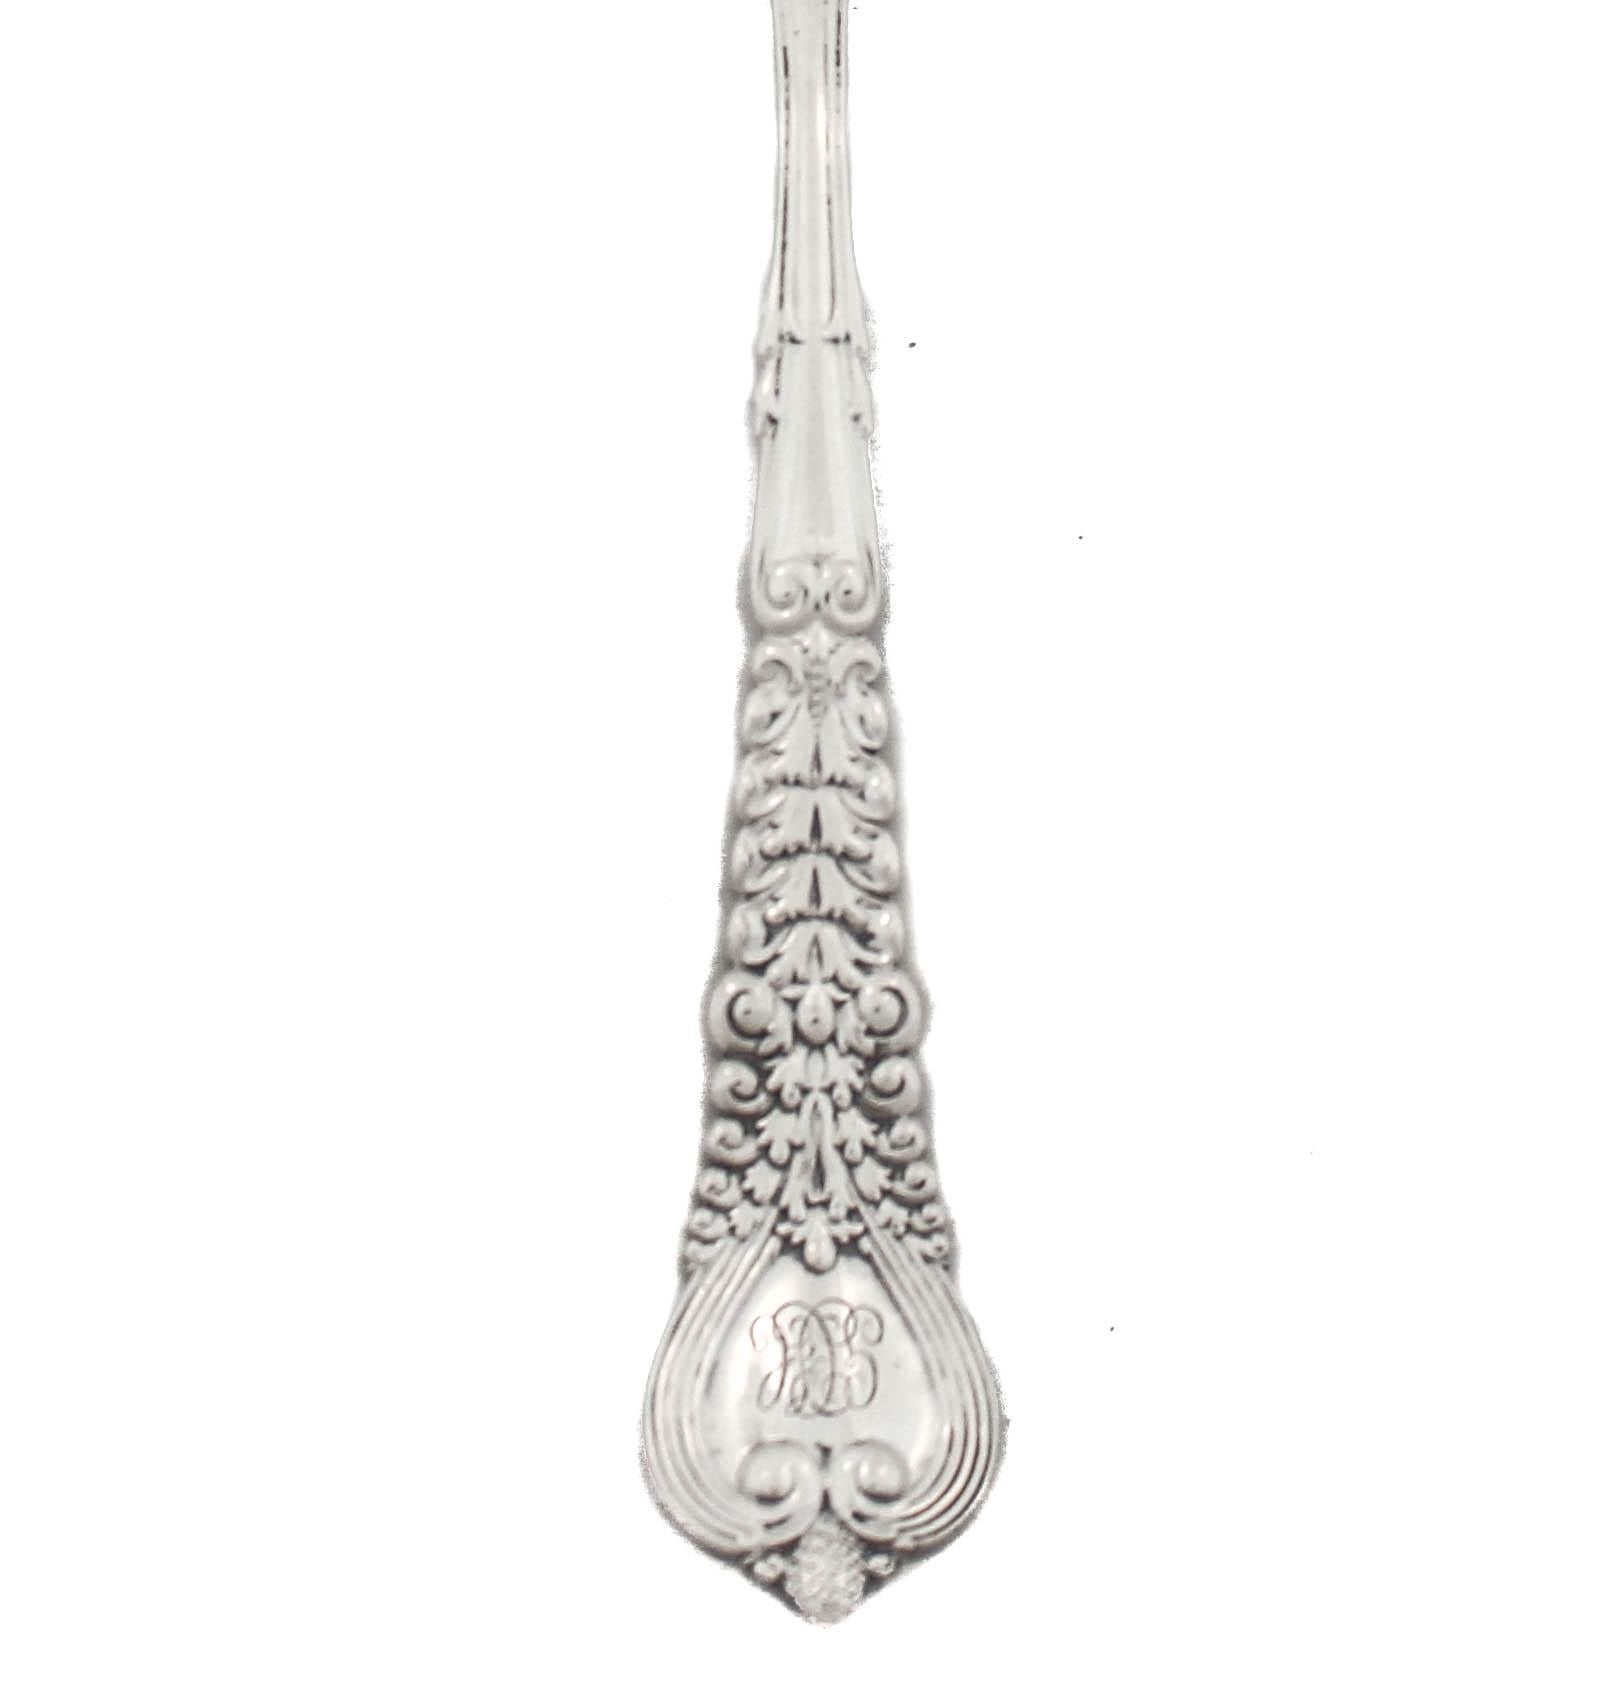 American Sterling Silver Tiffany Oyster Server For Sale